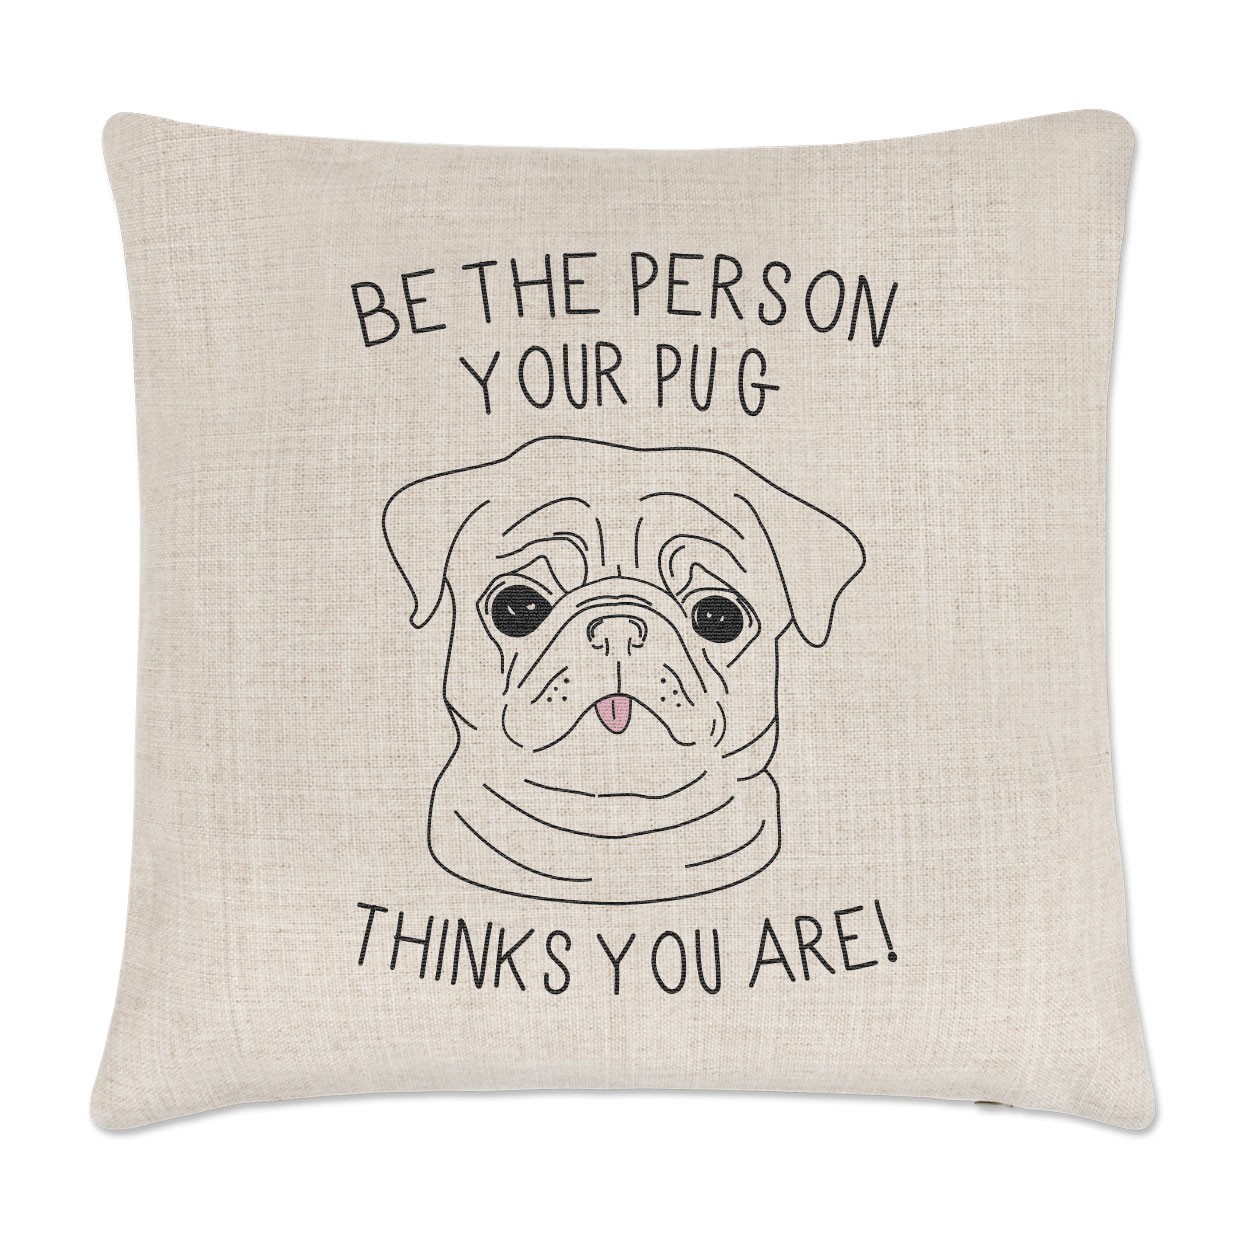 Be The Person Your Pug Thinks You Are Linen Cushion Cover